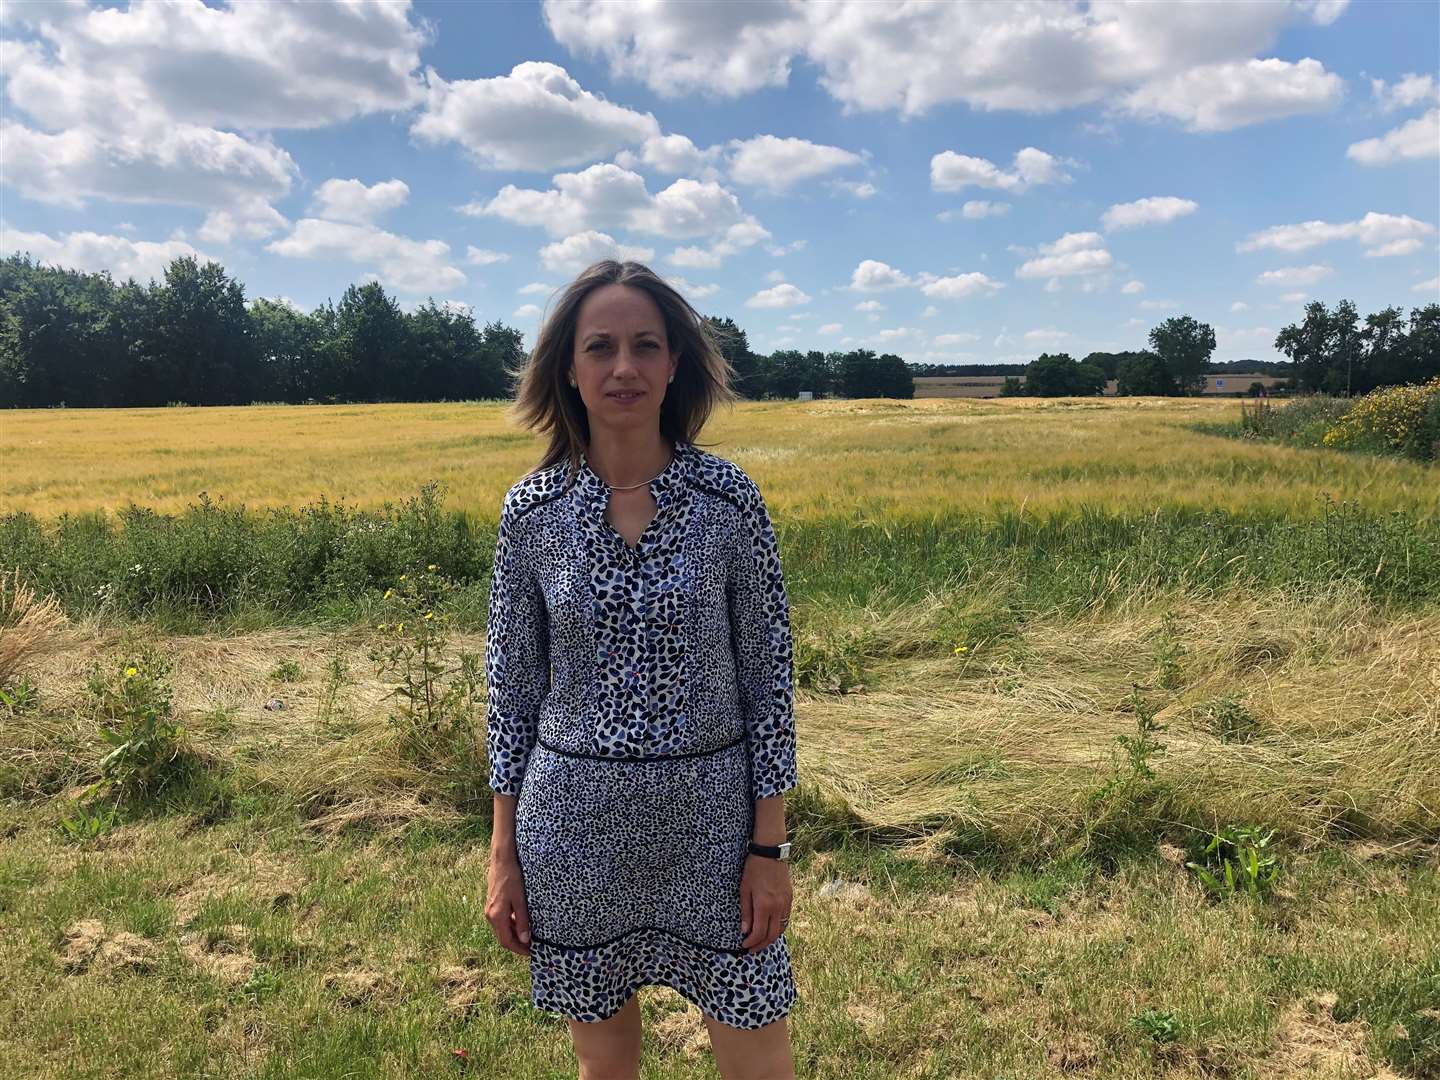 Faversham and Mid Kent MP Helen Whately is also concerned about the Cleve Hill Solar Park plans